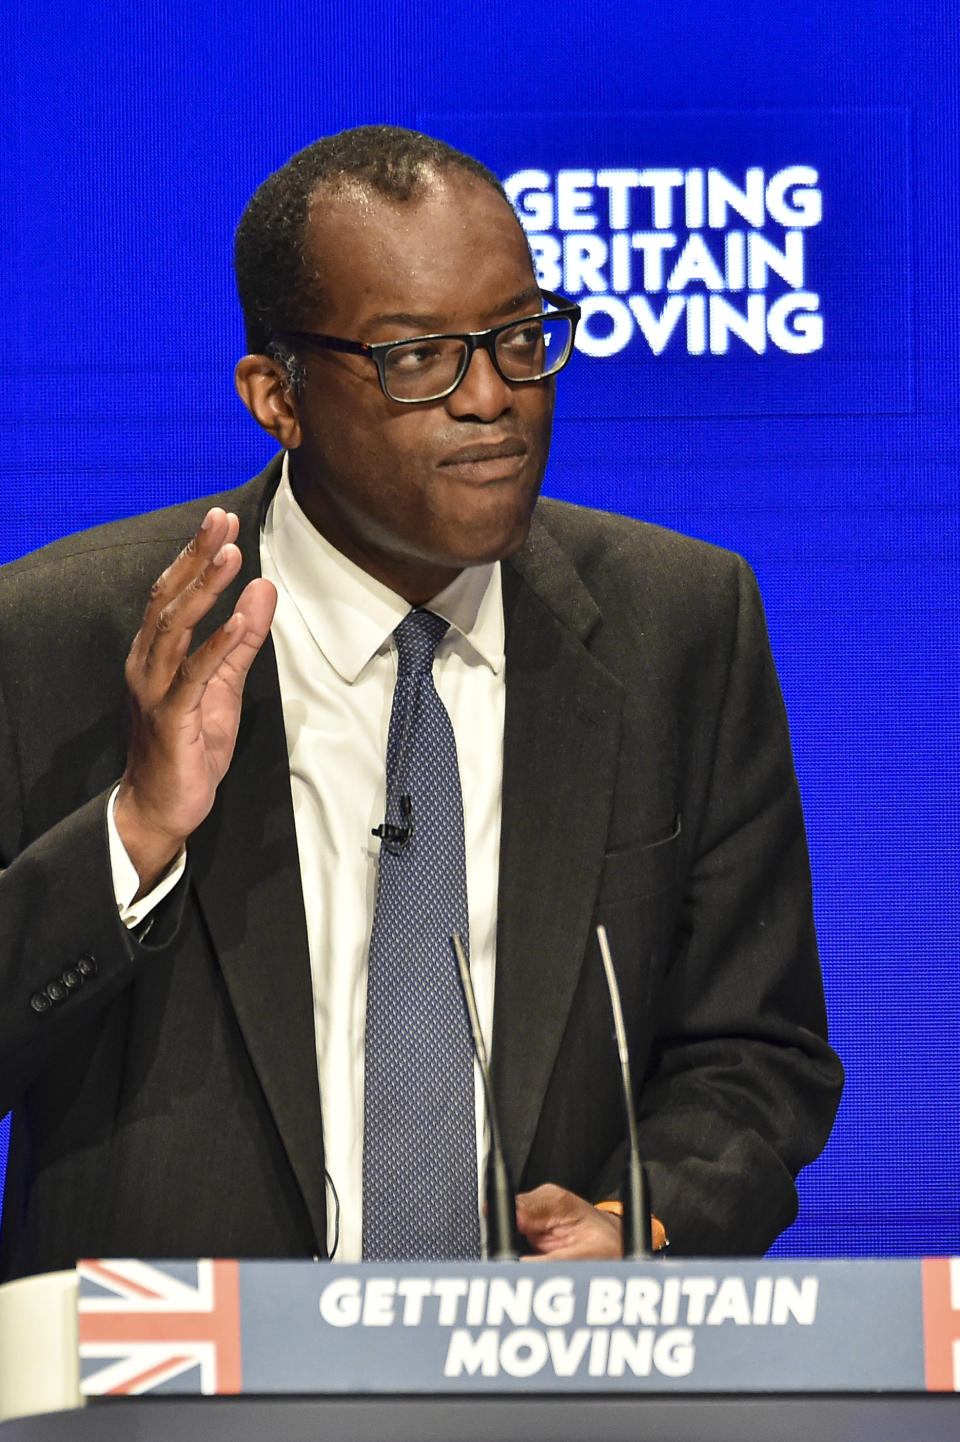 Britain's Chancellor of the Exchequer Kwasi Kwarteng speaks at the Conservative Party conference at the ICC in Birmingham, England, Monday, Oct. 3, 2022. The British government has dropped plans to cut income tax for top earners, part of a package of unfunded cuts that sparked turmoil on financial markets and sent the pound to record lows. (AP Photo/Rui Vieira)